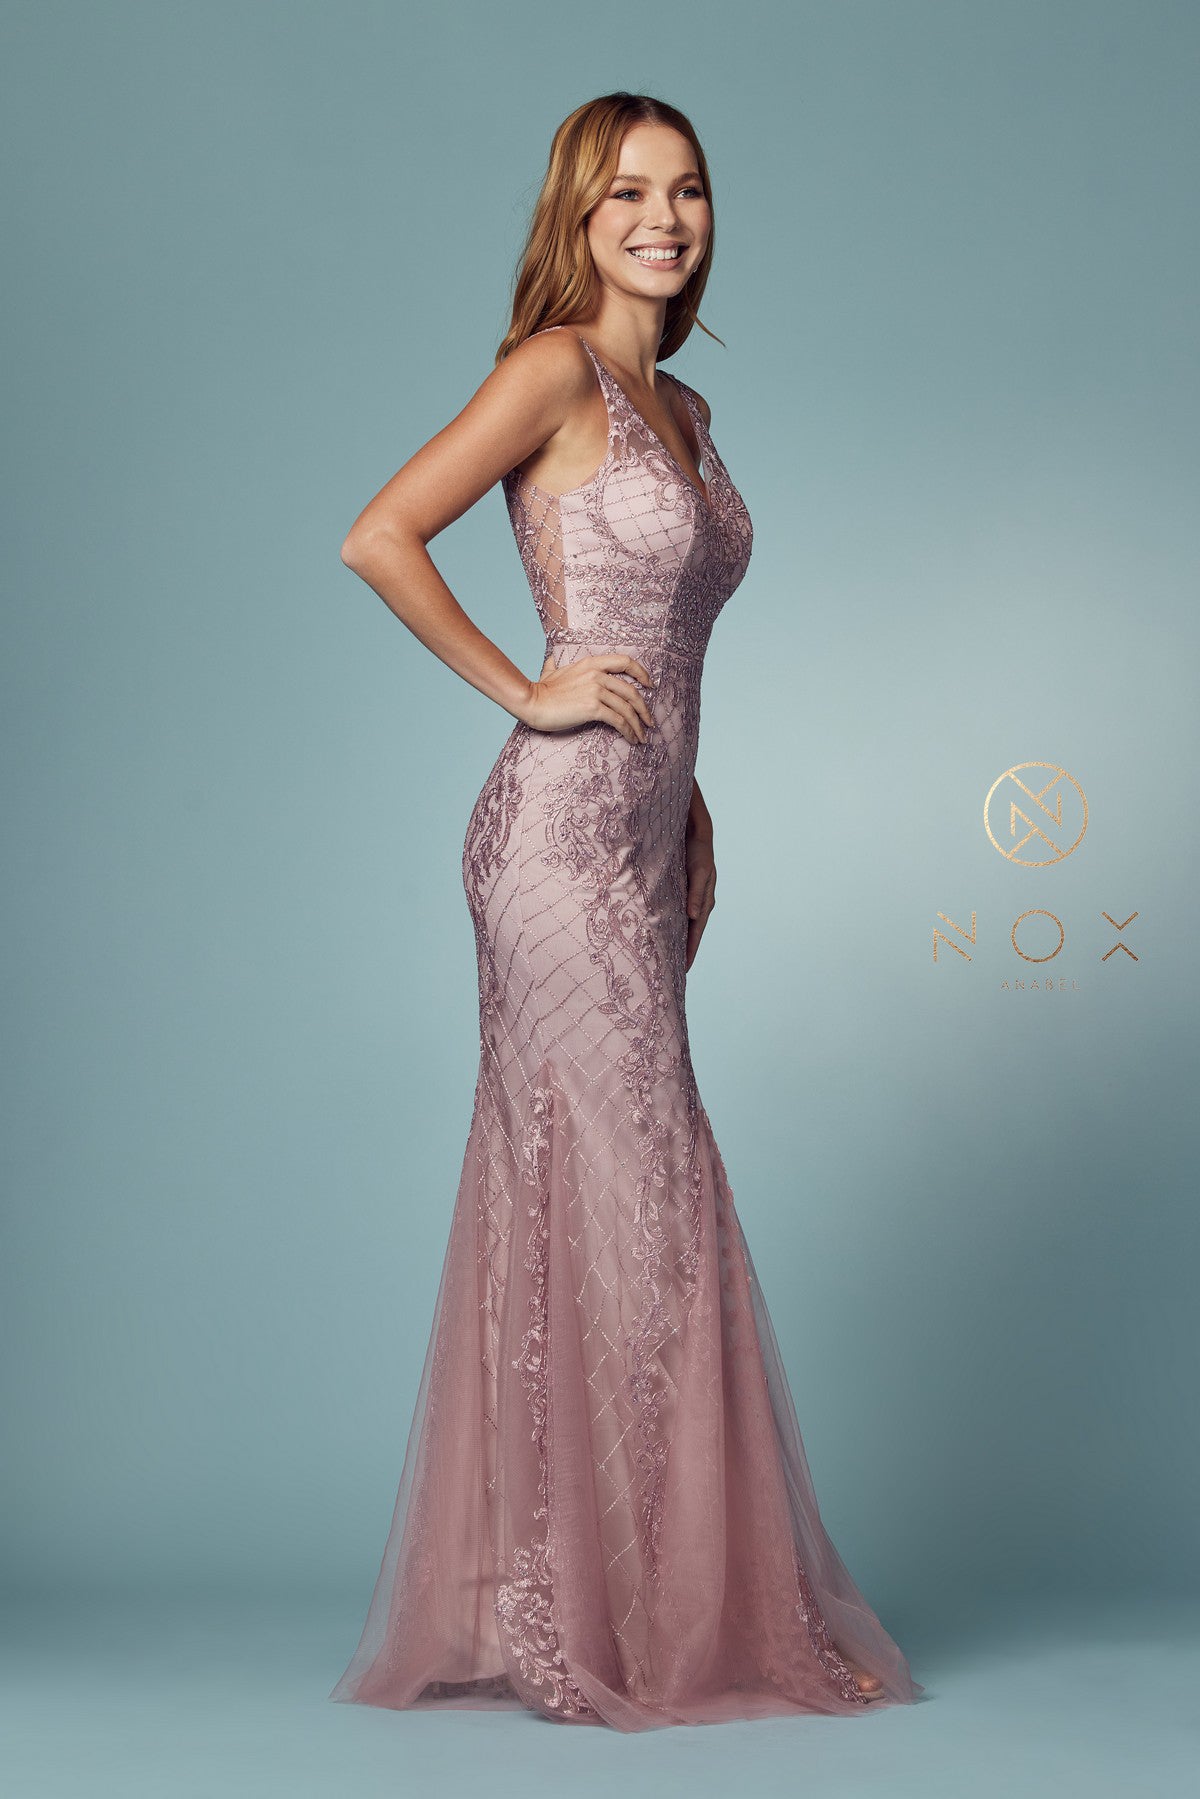 Nox Anabel A398 Long Embellished Lace Formal Evening Gown Prom Dress Wedding Guest Fulfill your wish to look like a princess with this long mermaid dress. The full-length dress comes with a deep V-neck design and an open back which makes it an excellent attire to wear at a party. The front and back have alluring embroidery  Available Sizes: 2-16  Available Colors: Burgundy, Gold, Navy Blue, Rose, Black, Lemon, Light Blue, Green